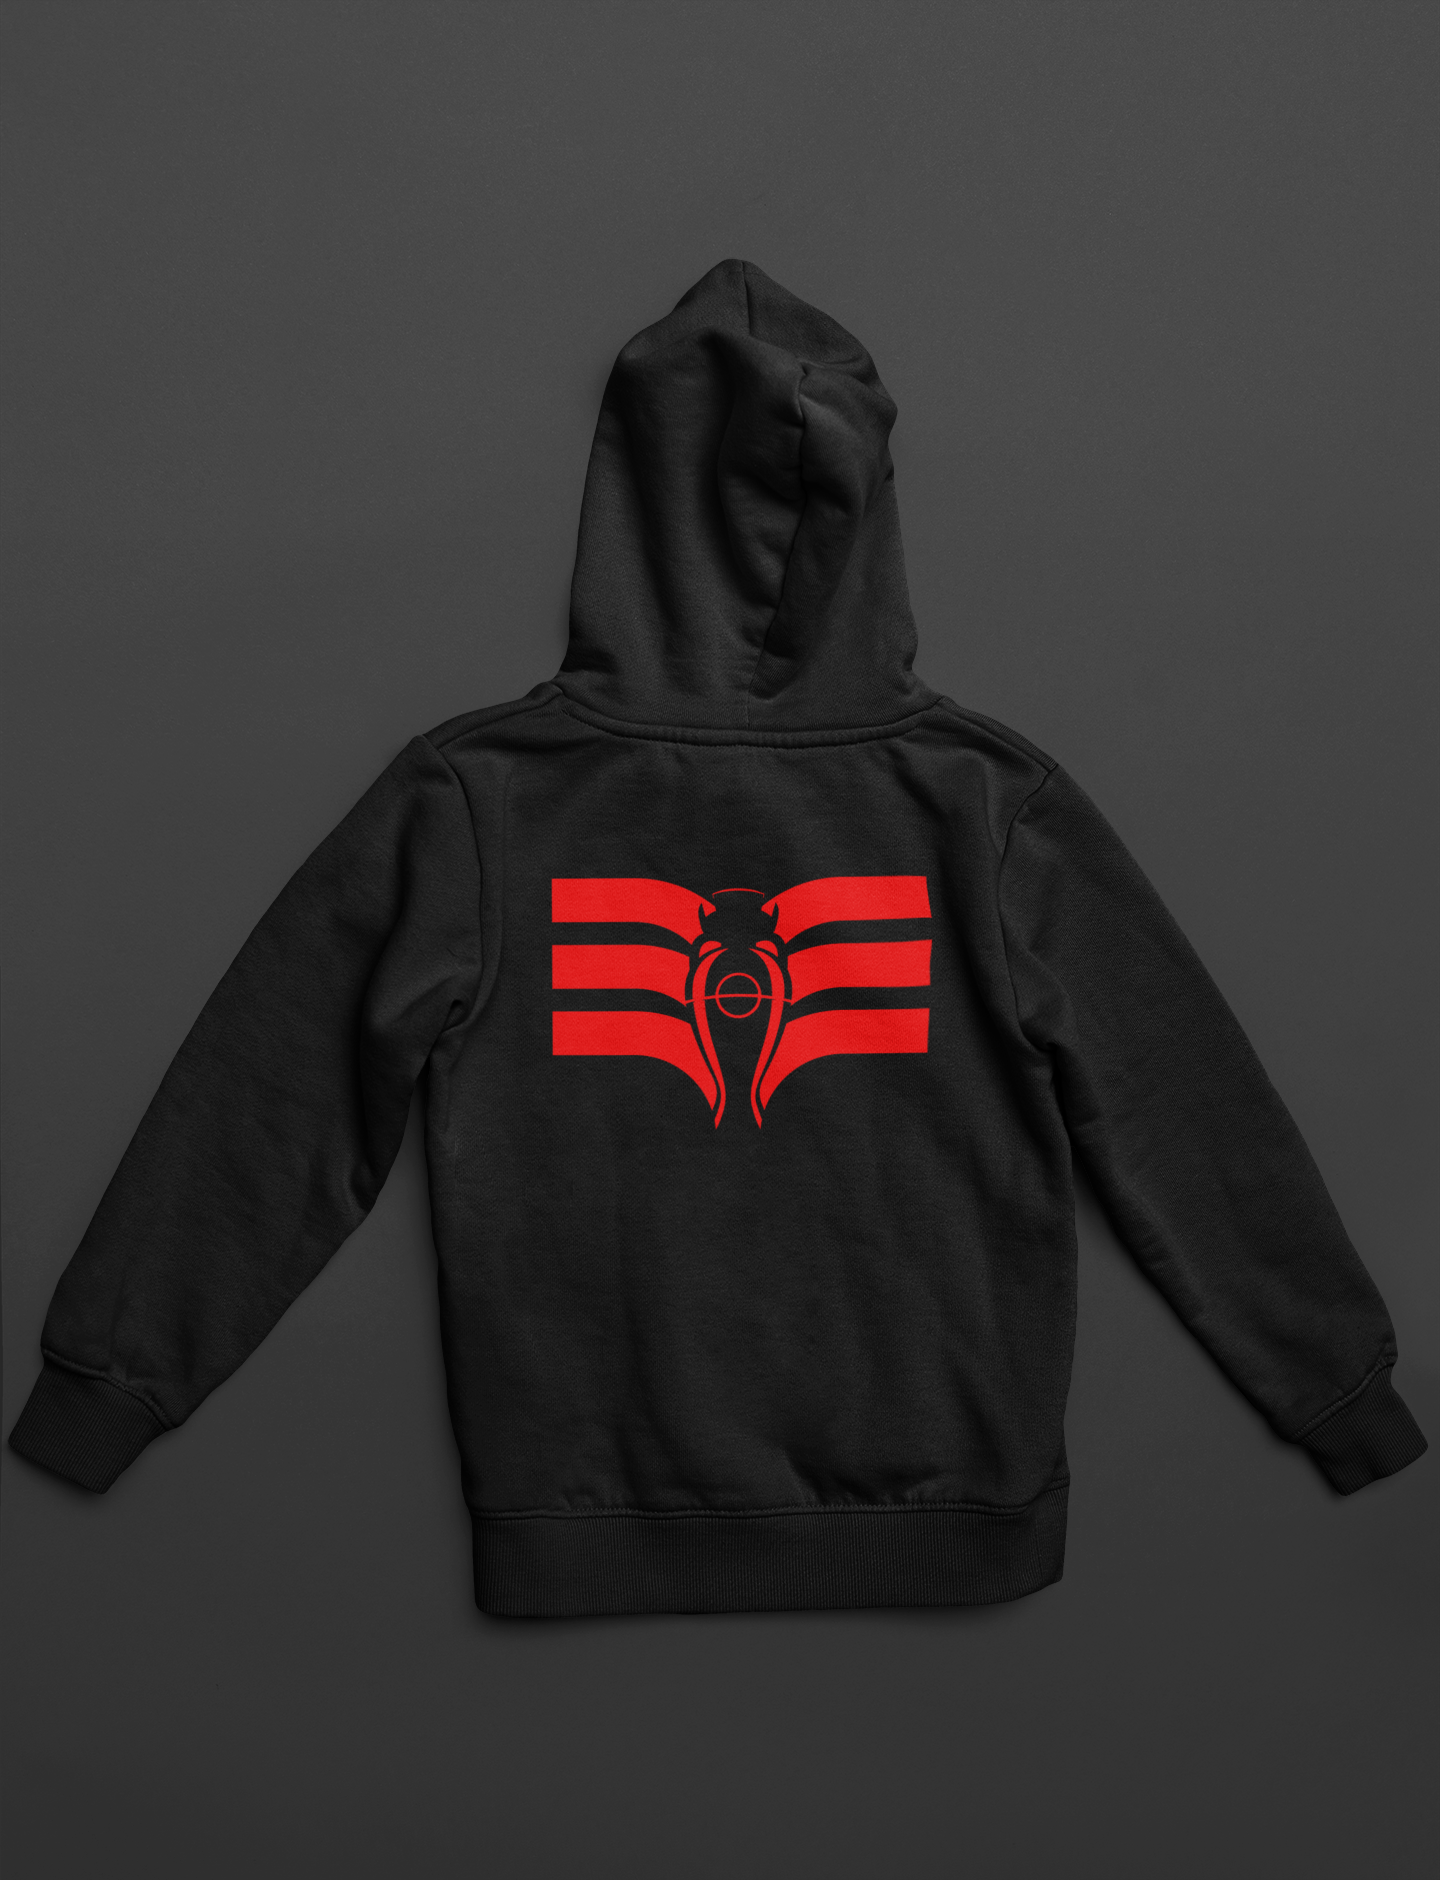 BLACK HOODIE WITH GRAFFITI - EAGLE ON THE BACK